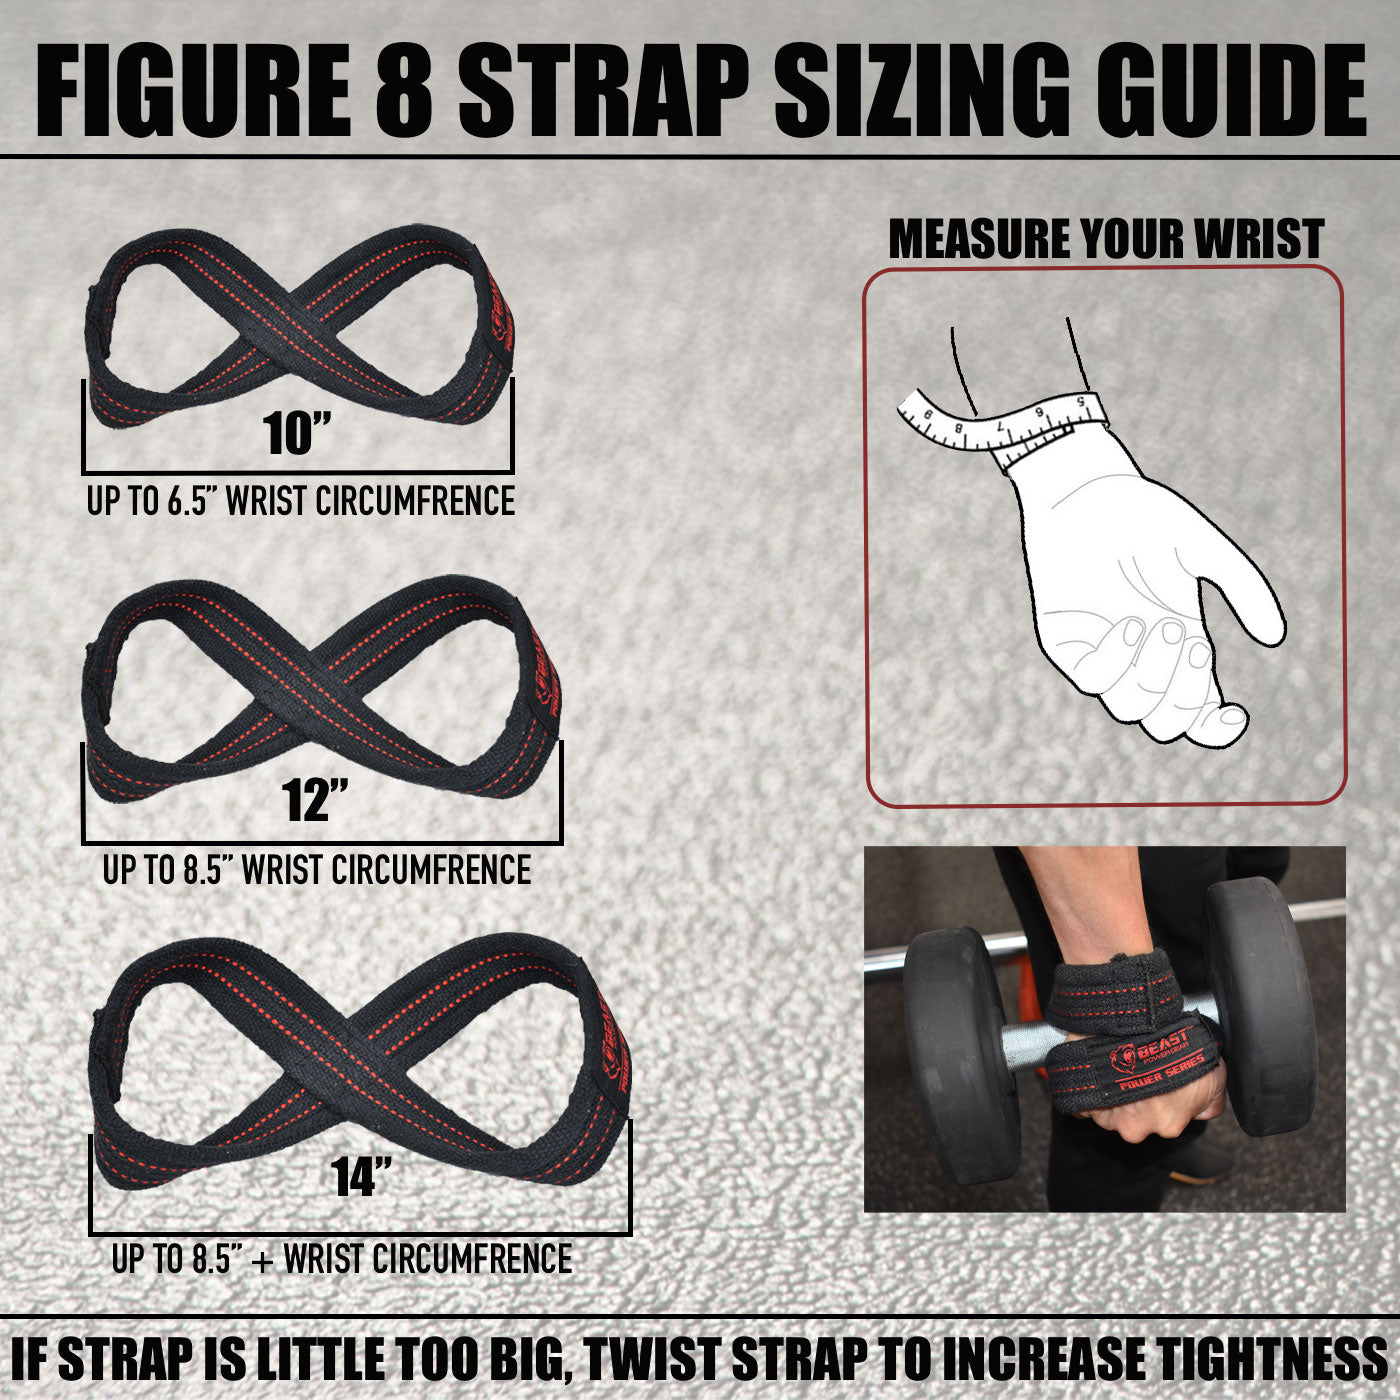 Grip Power Pads Deadlift Straps BEST LIFTING STRAPS ON THE MARKET! Figure 8 Lifting  Straps are the #1 choice for power lifters, weightlifters and workout  enthusiasts! 